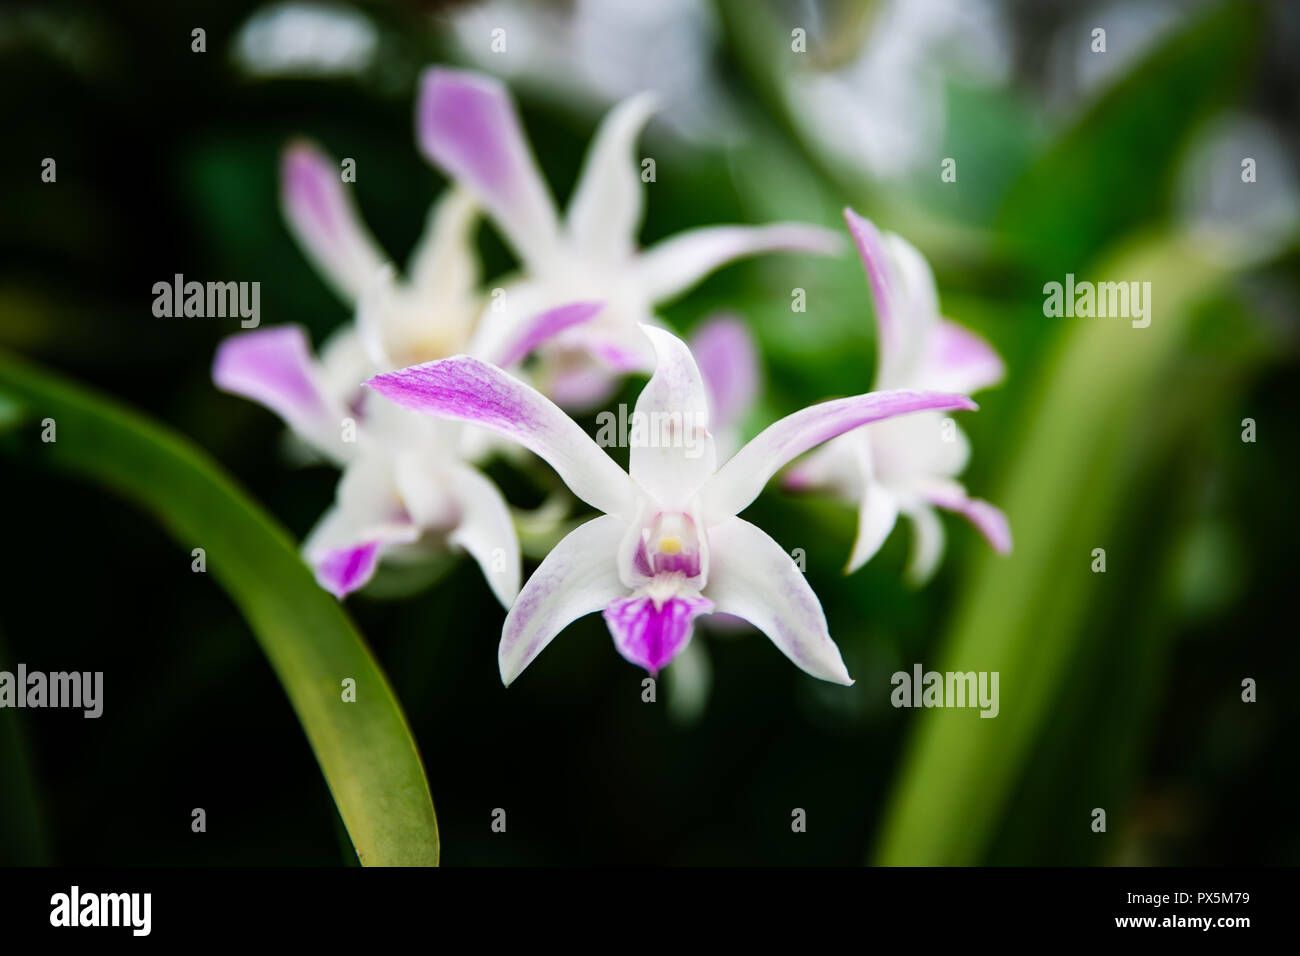 White Phaius orchids with shades of purple in Lembang, Indonesia Stock Photo